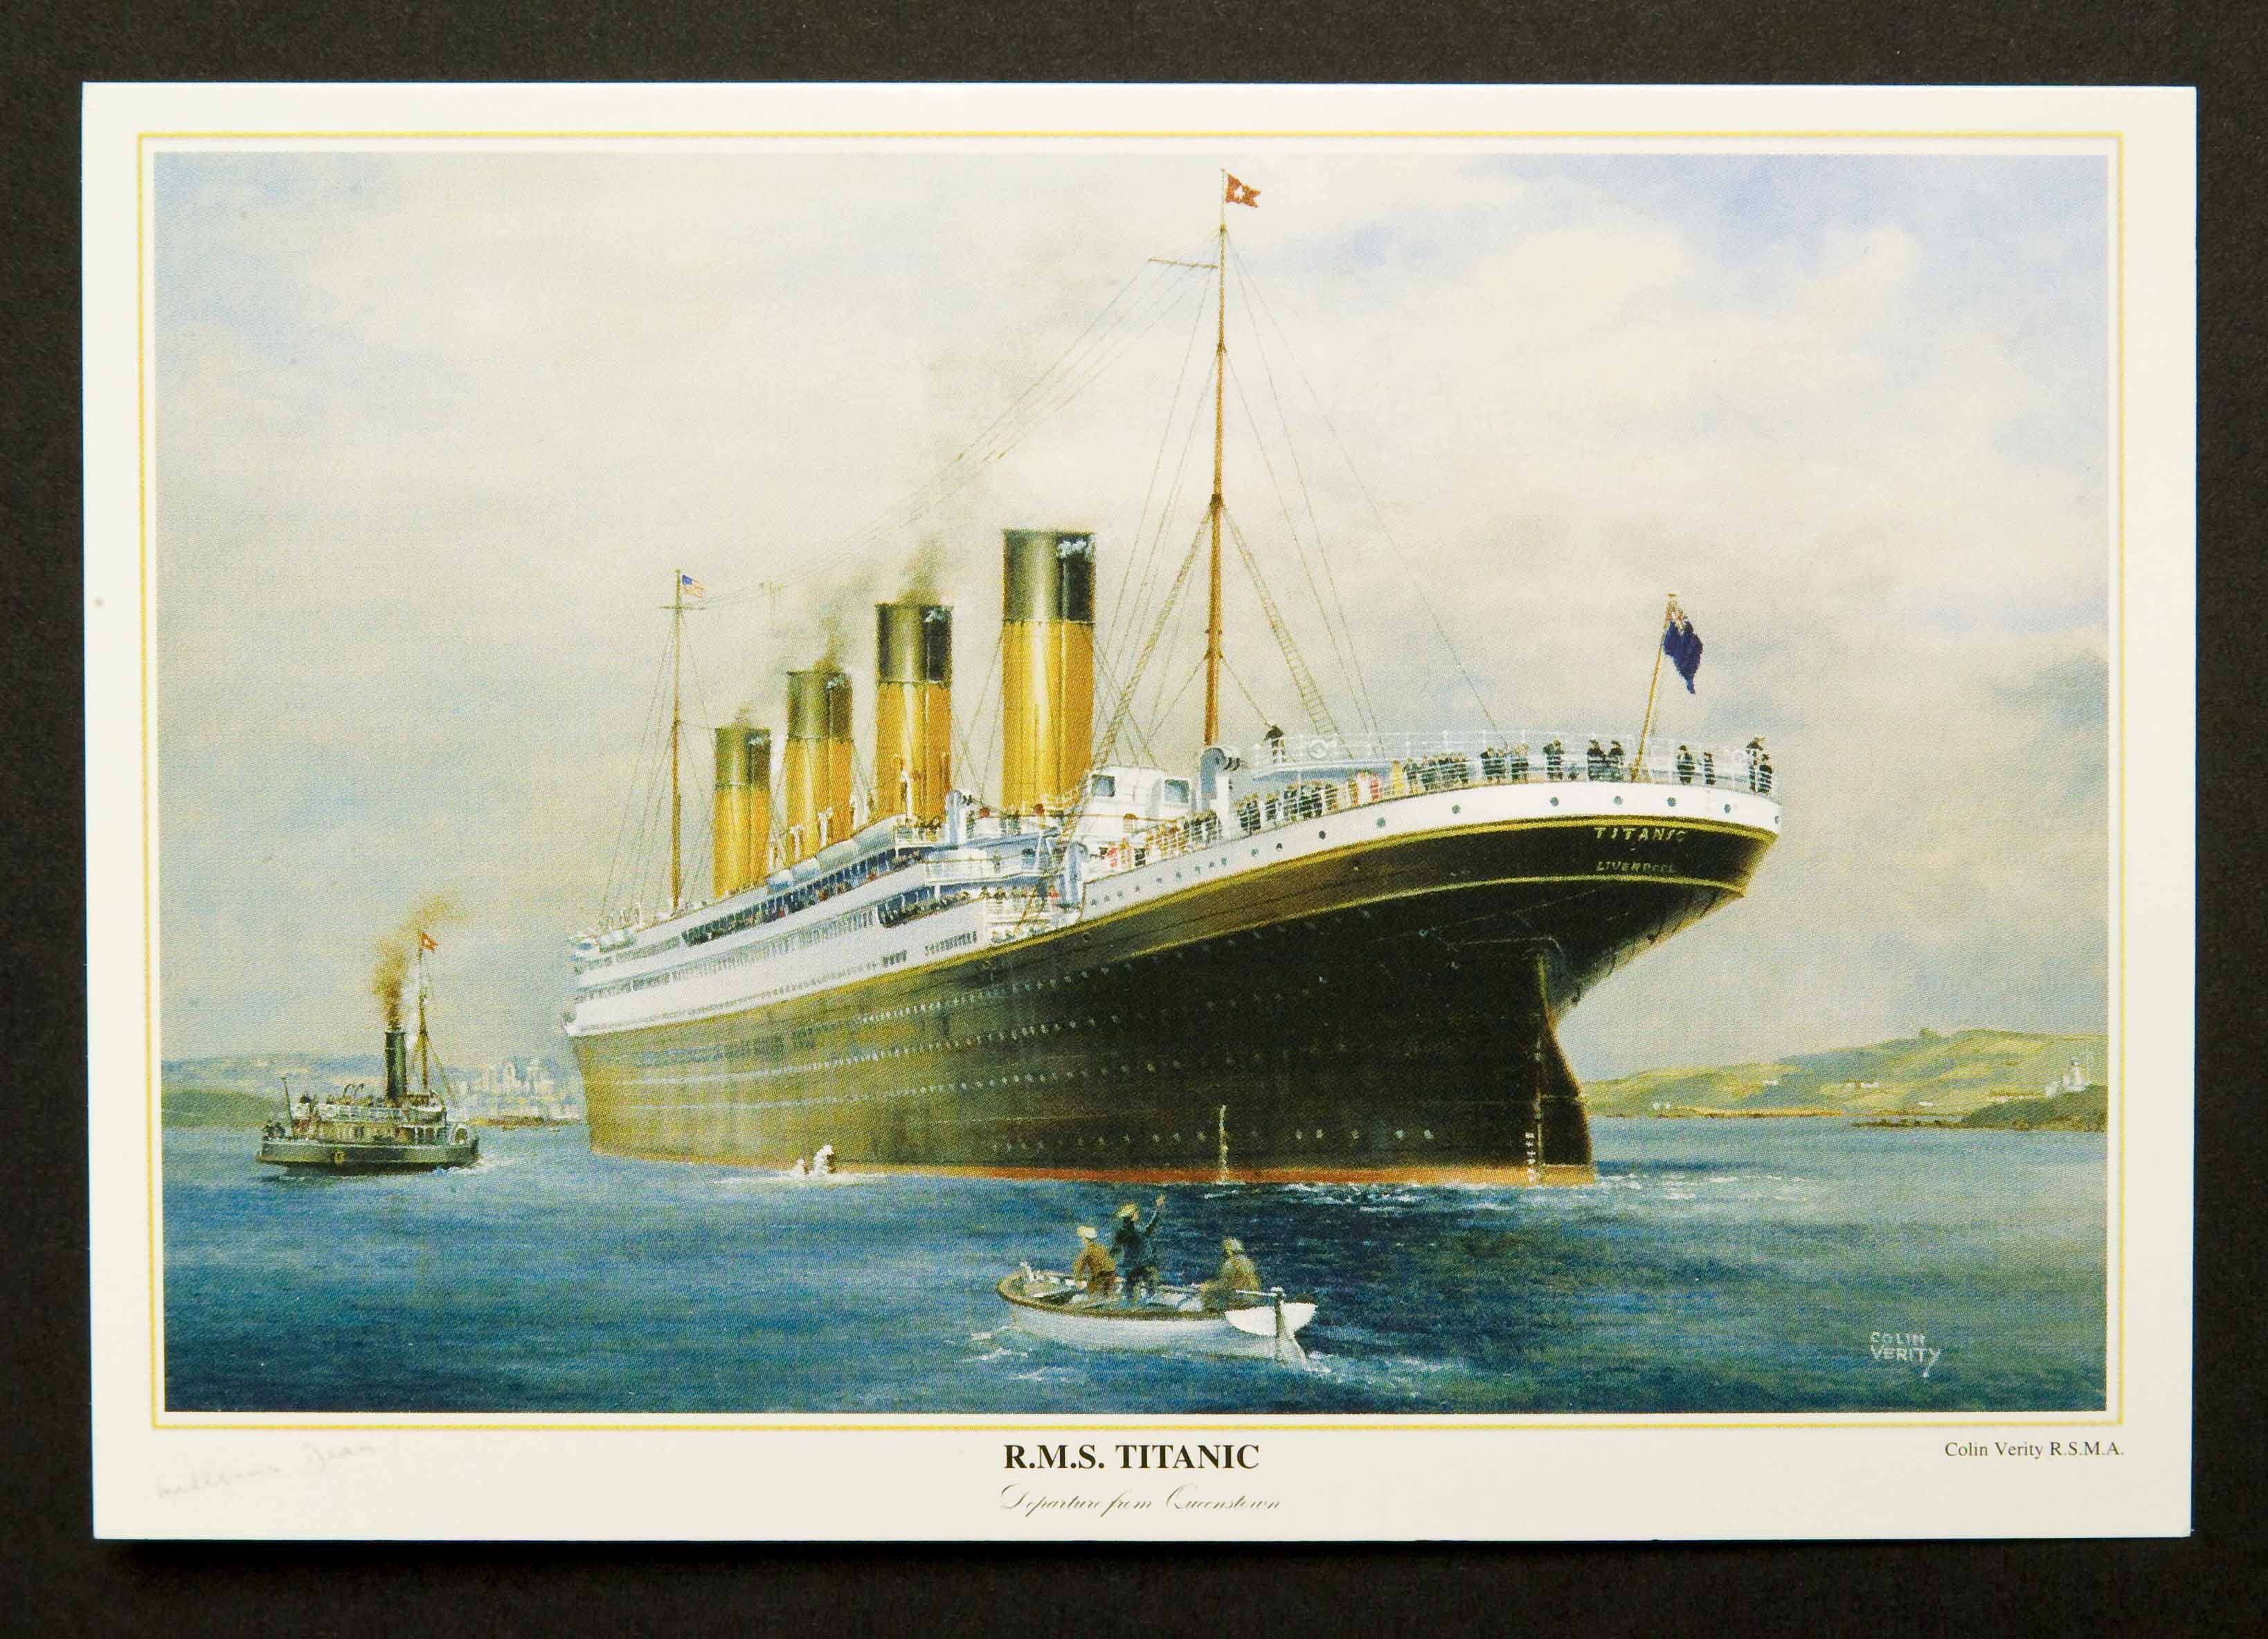 Titanic Queenstown A1 size Poster by Colin Verity